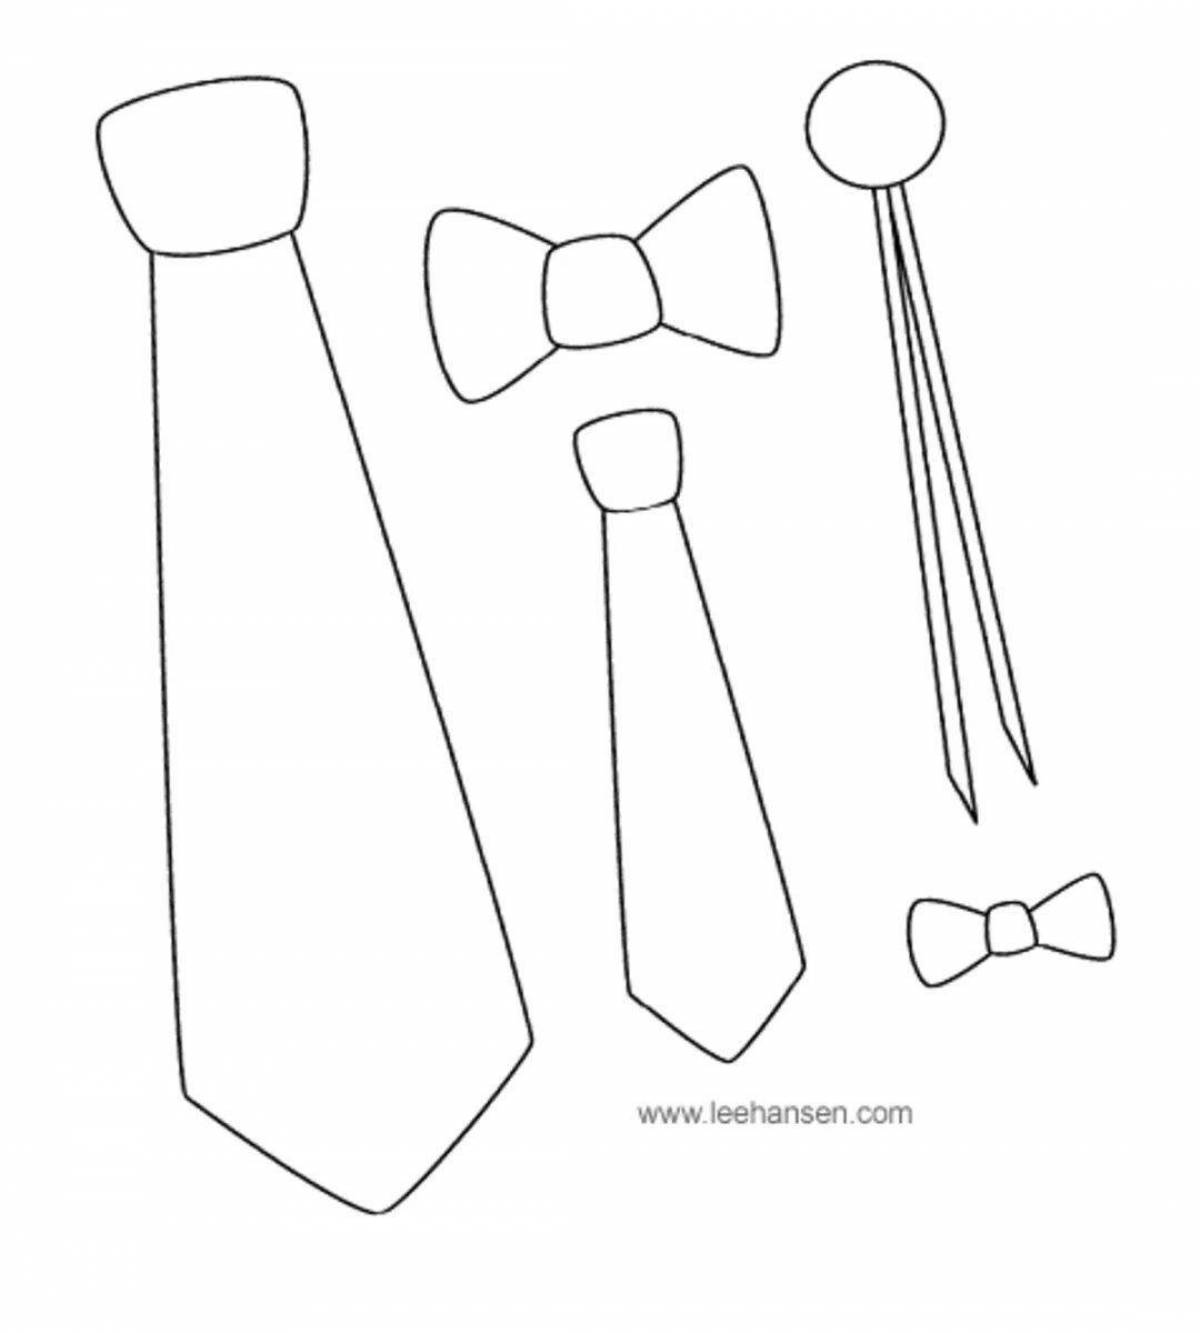 Fabulous dad tie coloring page